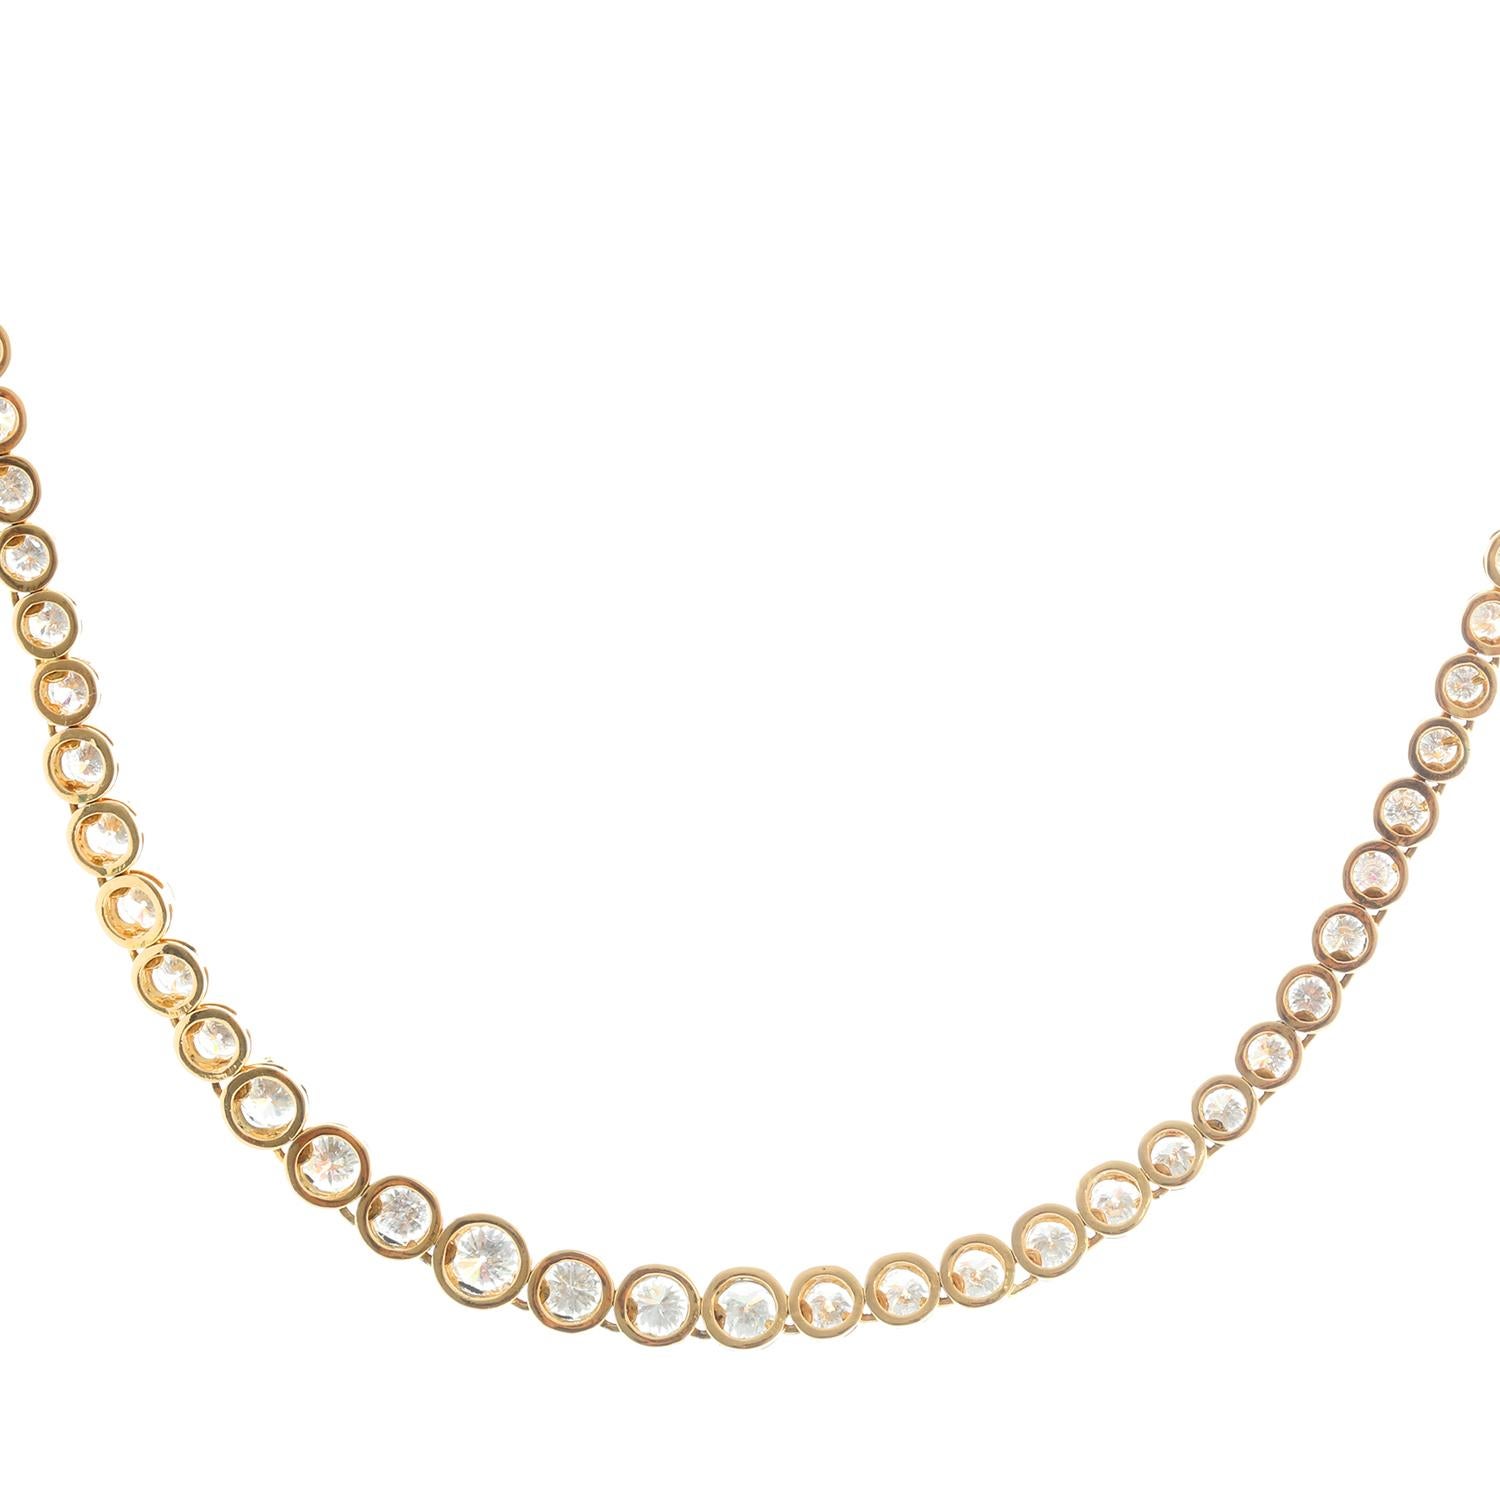 Sparkling 18K Yellow Gold Diamond Necklace - This sparkling necklace features 10 ctw. round-cut brilliant diamonds set in 18k yellow gold. Gradually increasing diamonds  Necklace measures apx. 16-inches in length. Total weight is 26.6 grams. Diamond